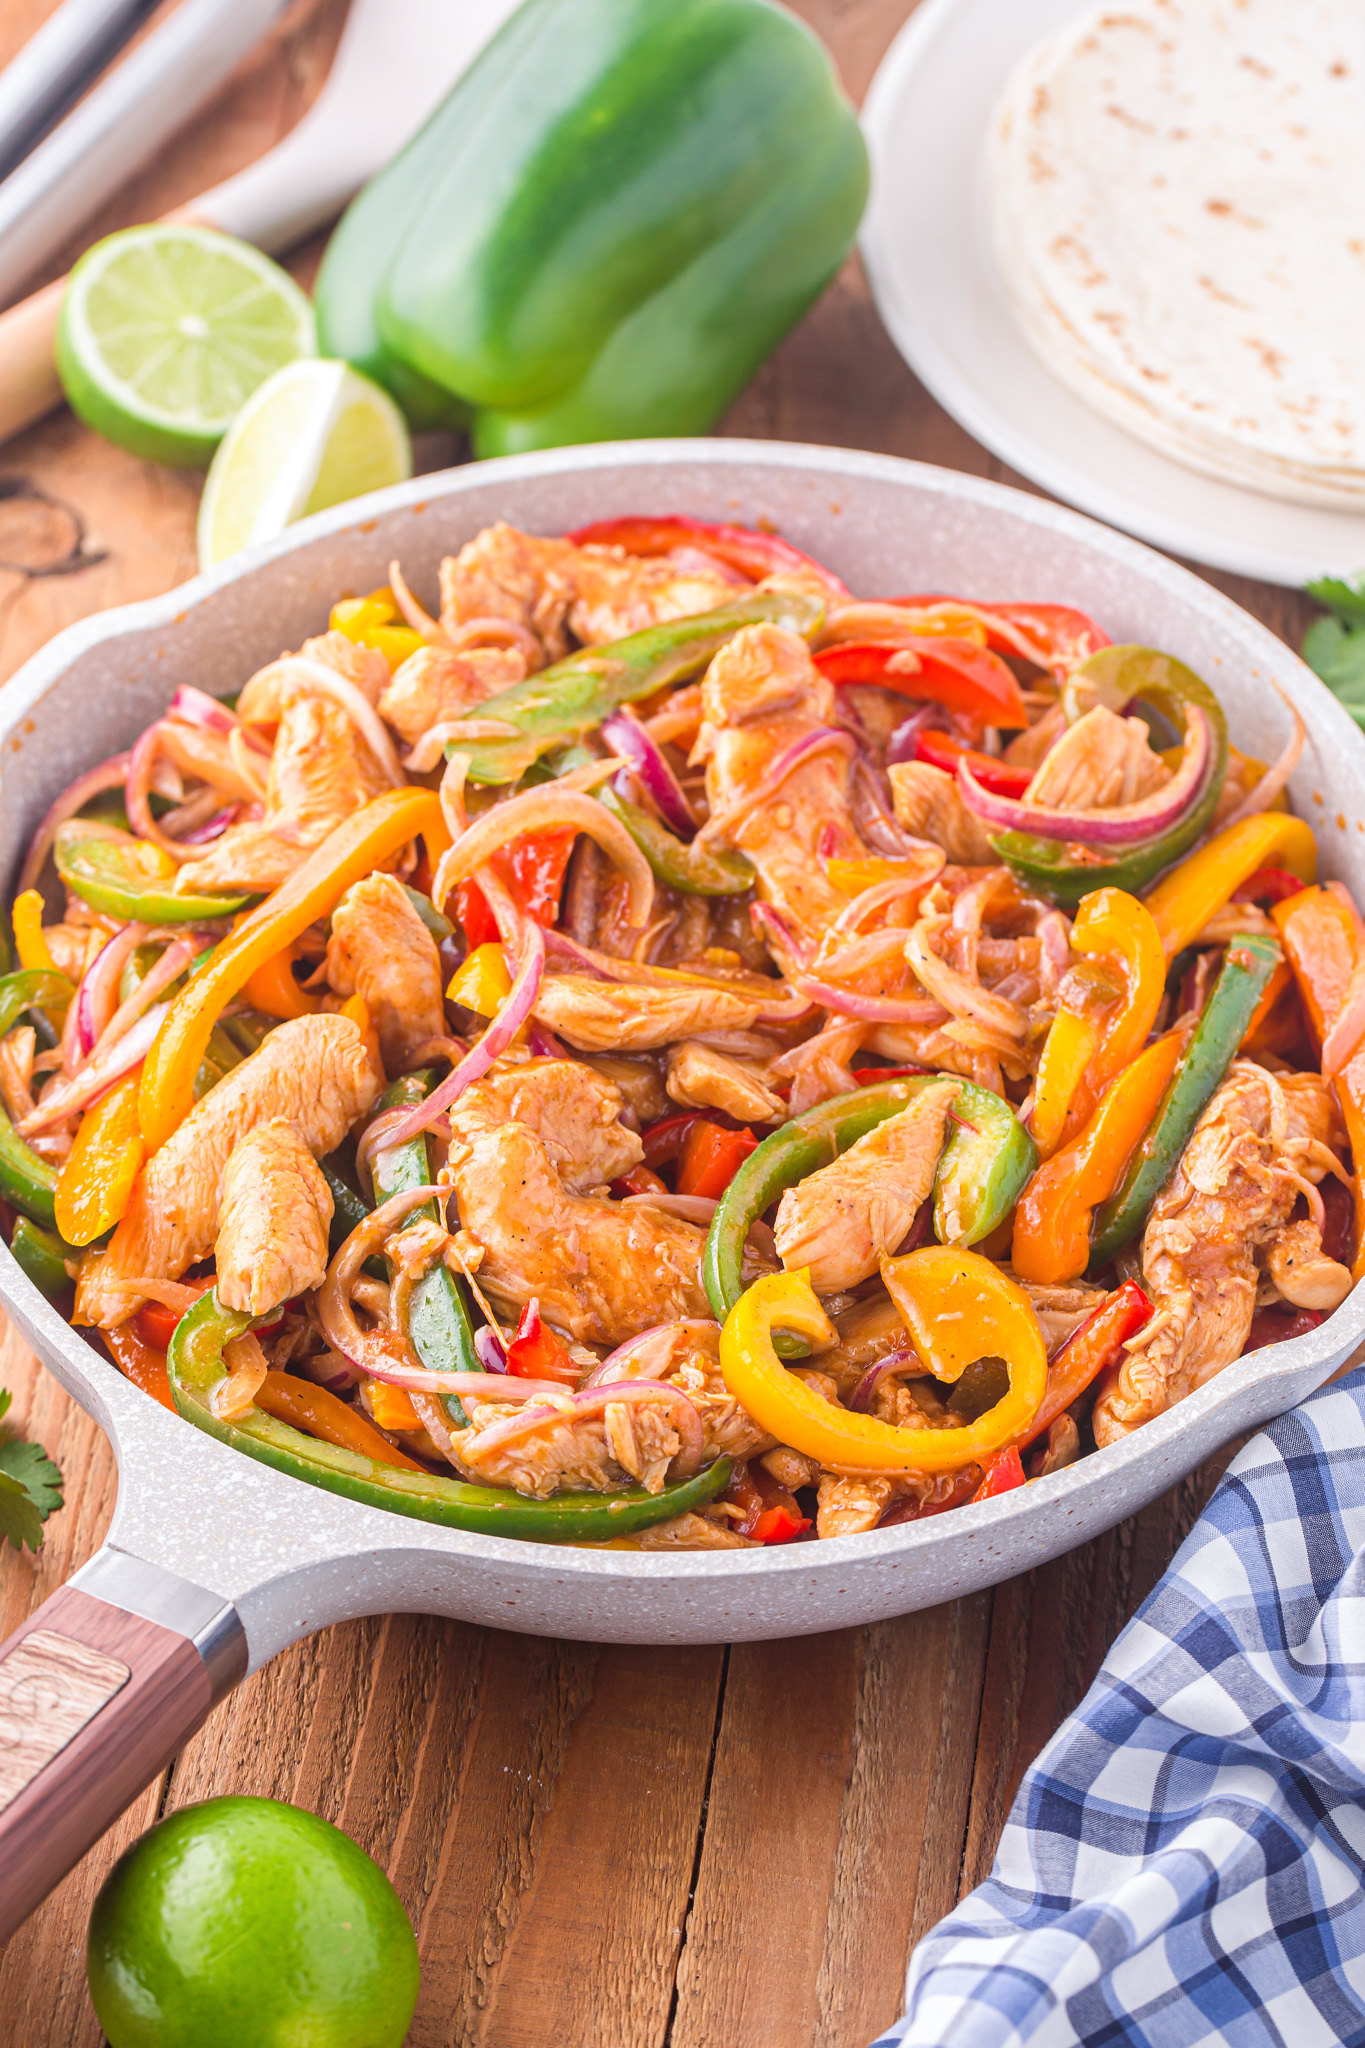 Skillet filled with chicken fajitas. Strips of chicken, sliced bell peppers, and onions coated in fajita seasoning and lime juice. 